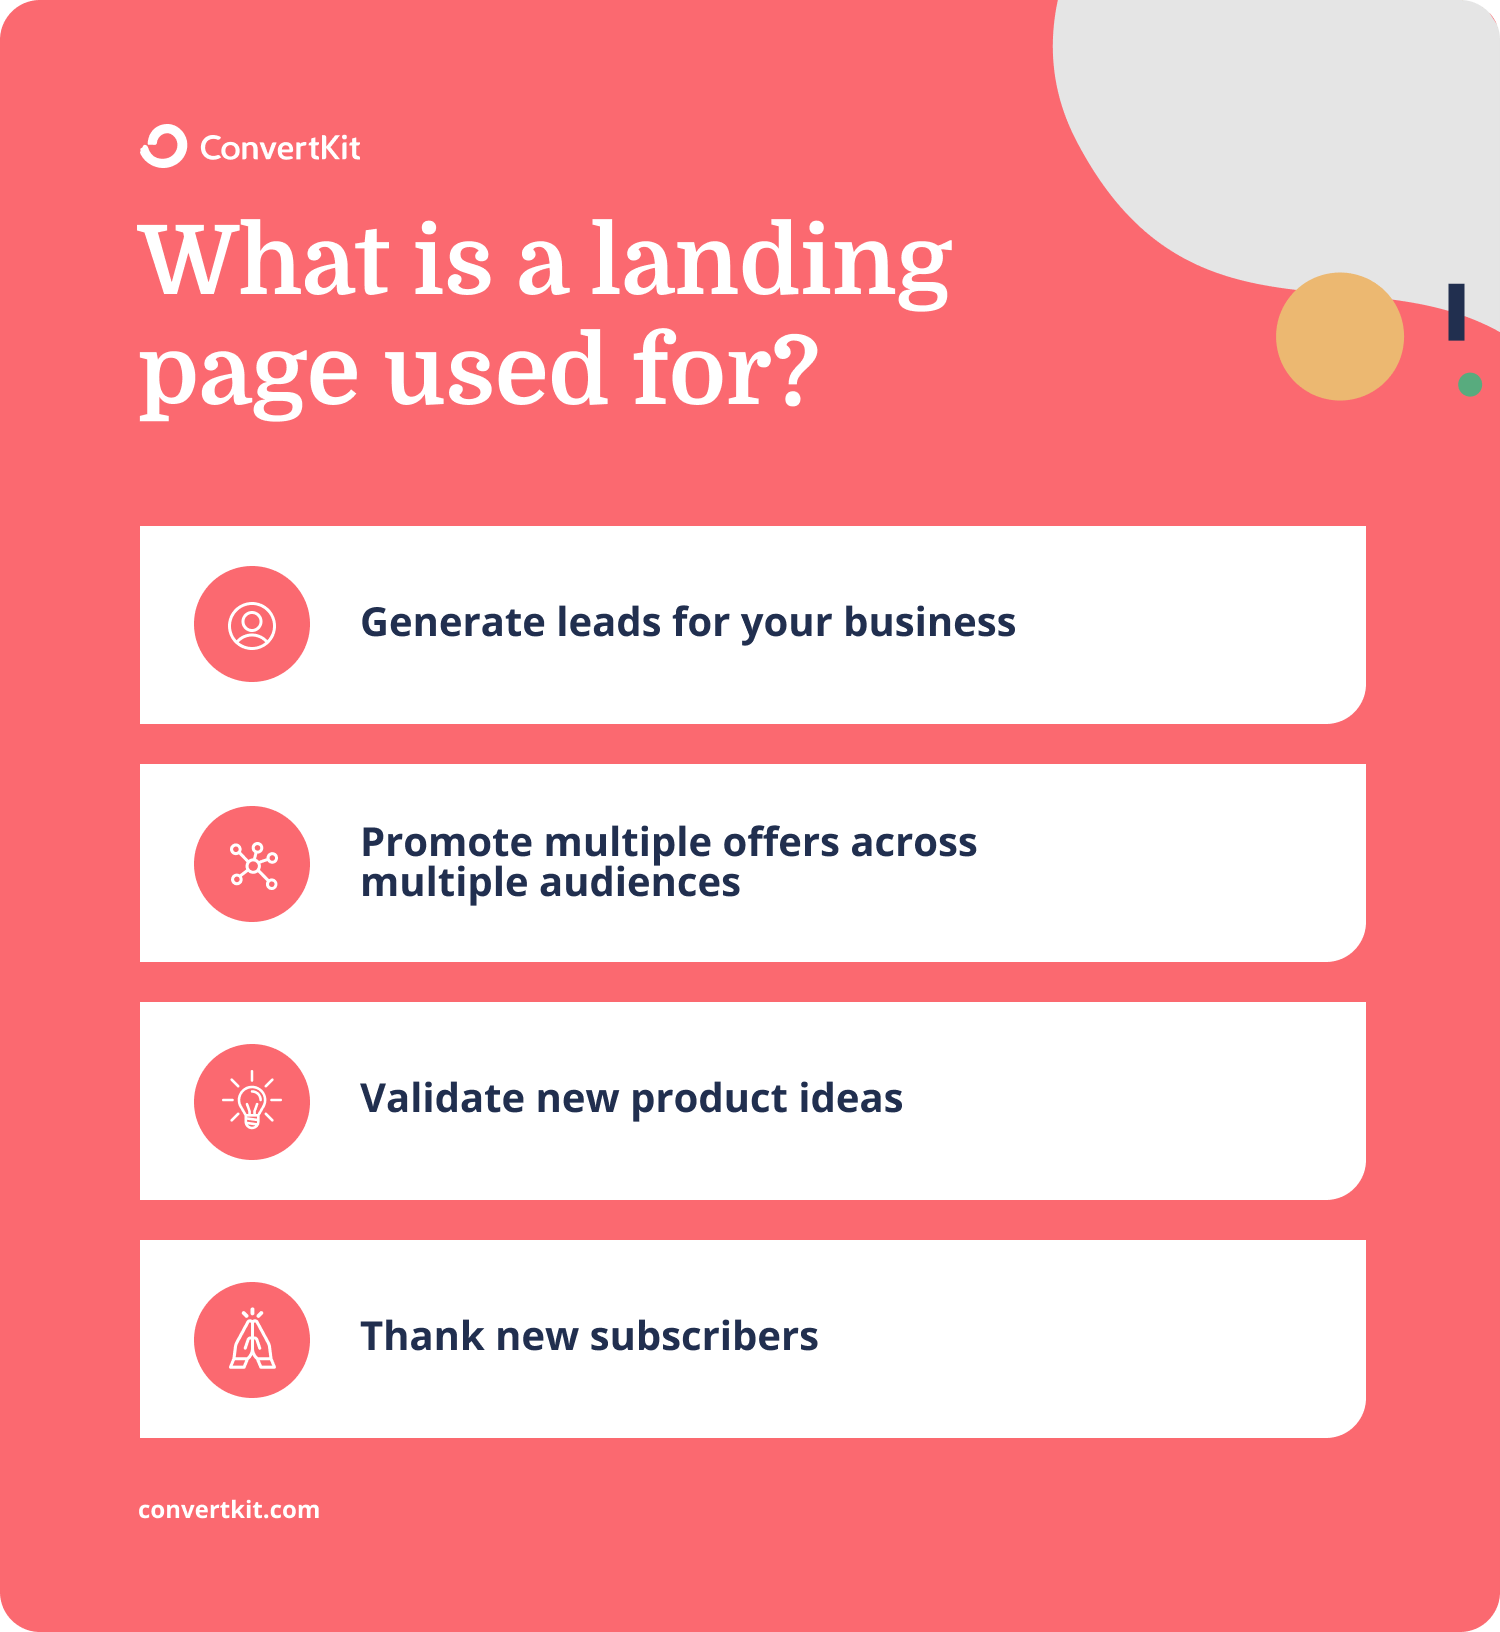 What is a landing page used for?